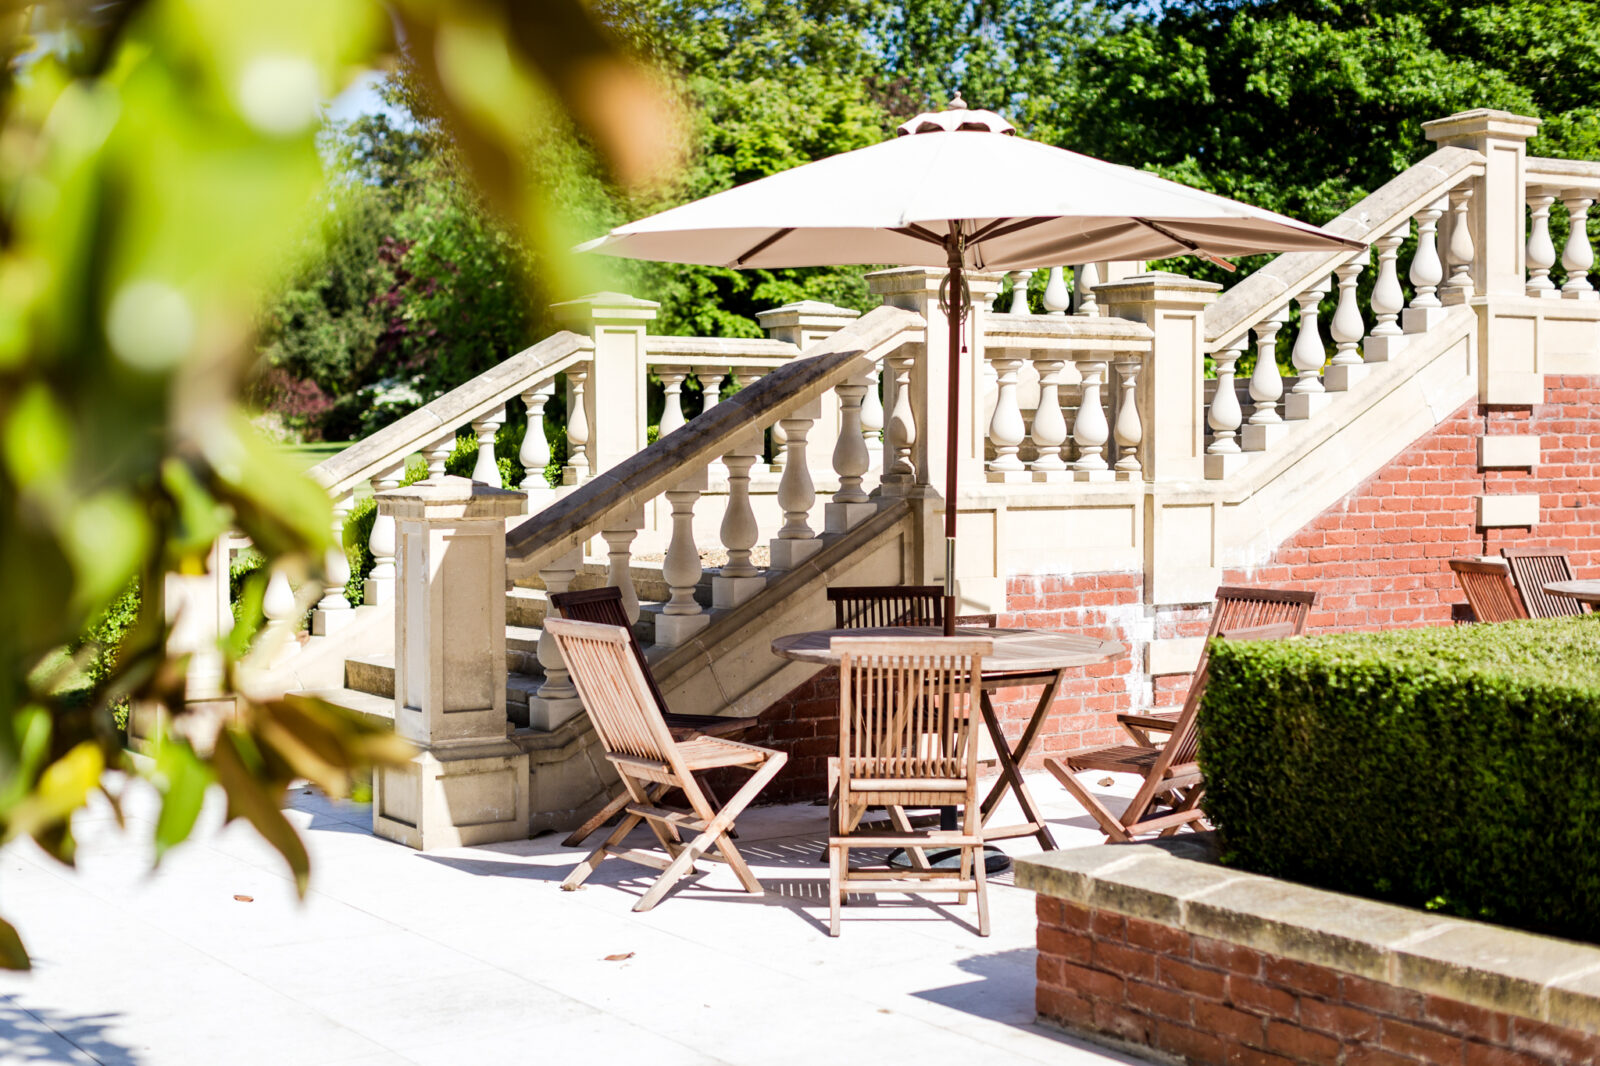 Meeting Space in Surrey - The Terrace at Fetcham Park